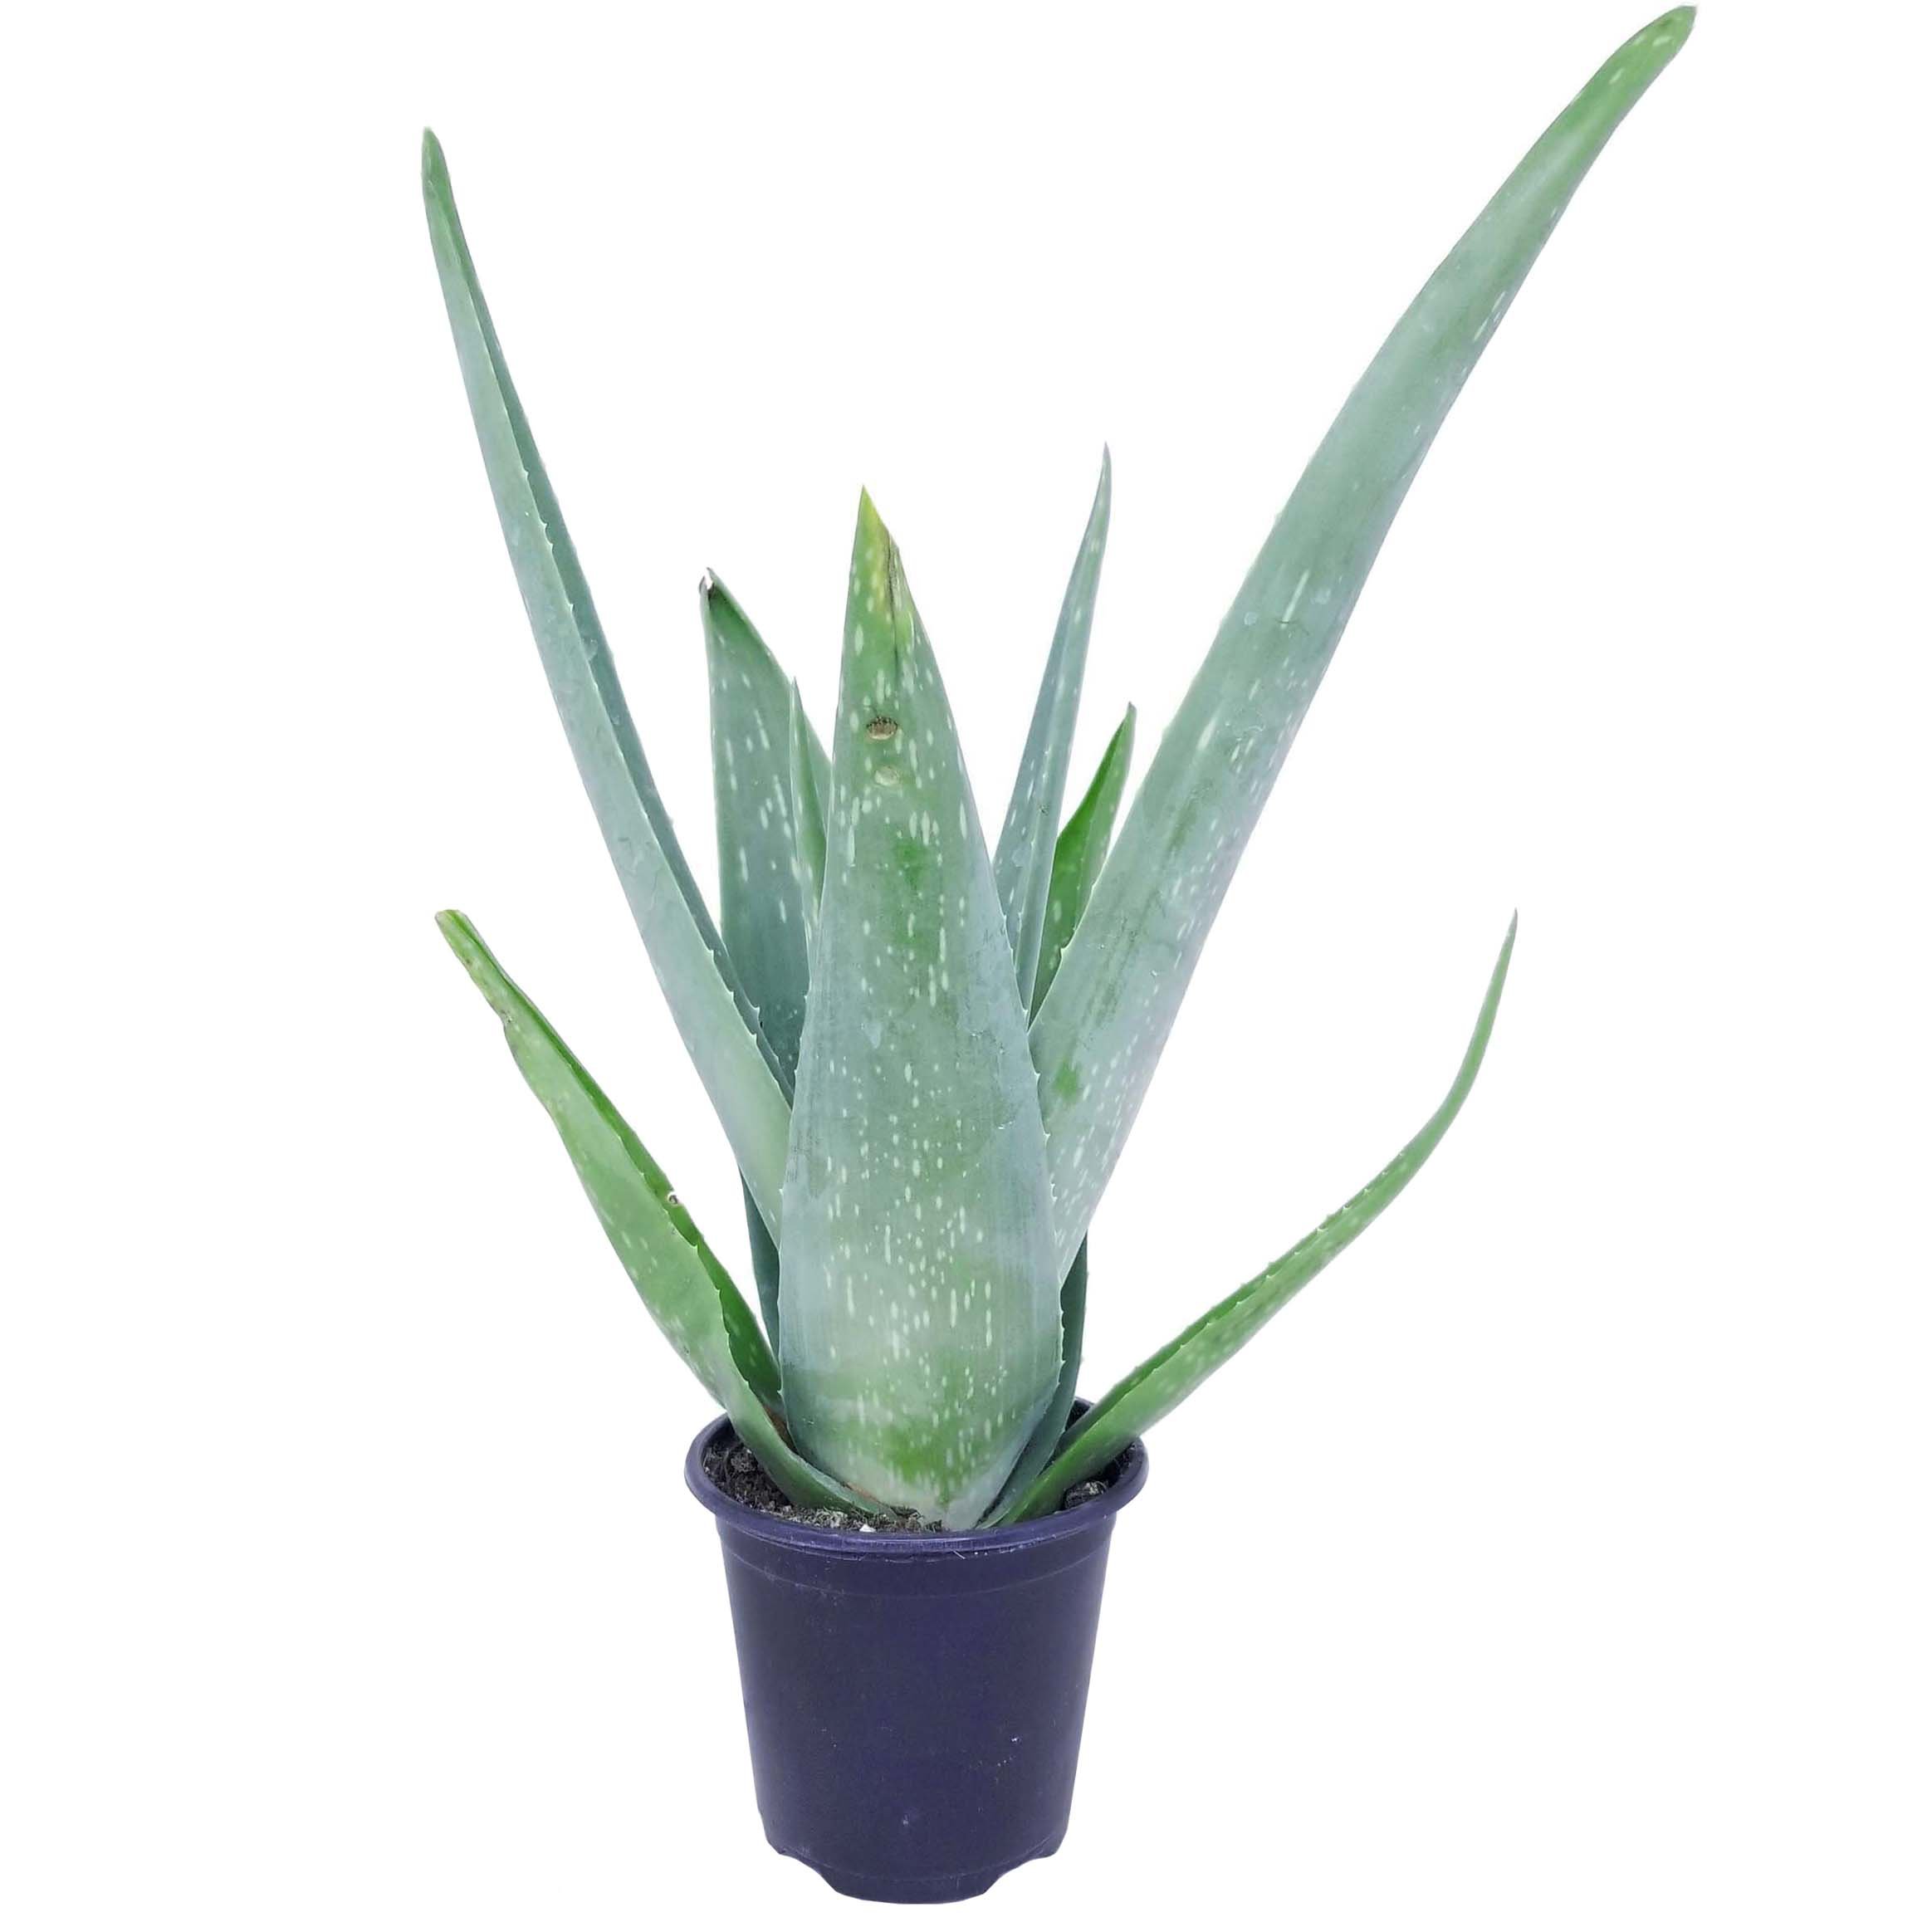 Theuts Flower Barn Aloe Vera Plant In Pot Shop Potted Plants At H E B 7003